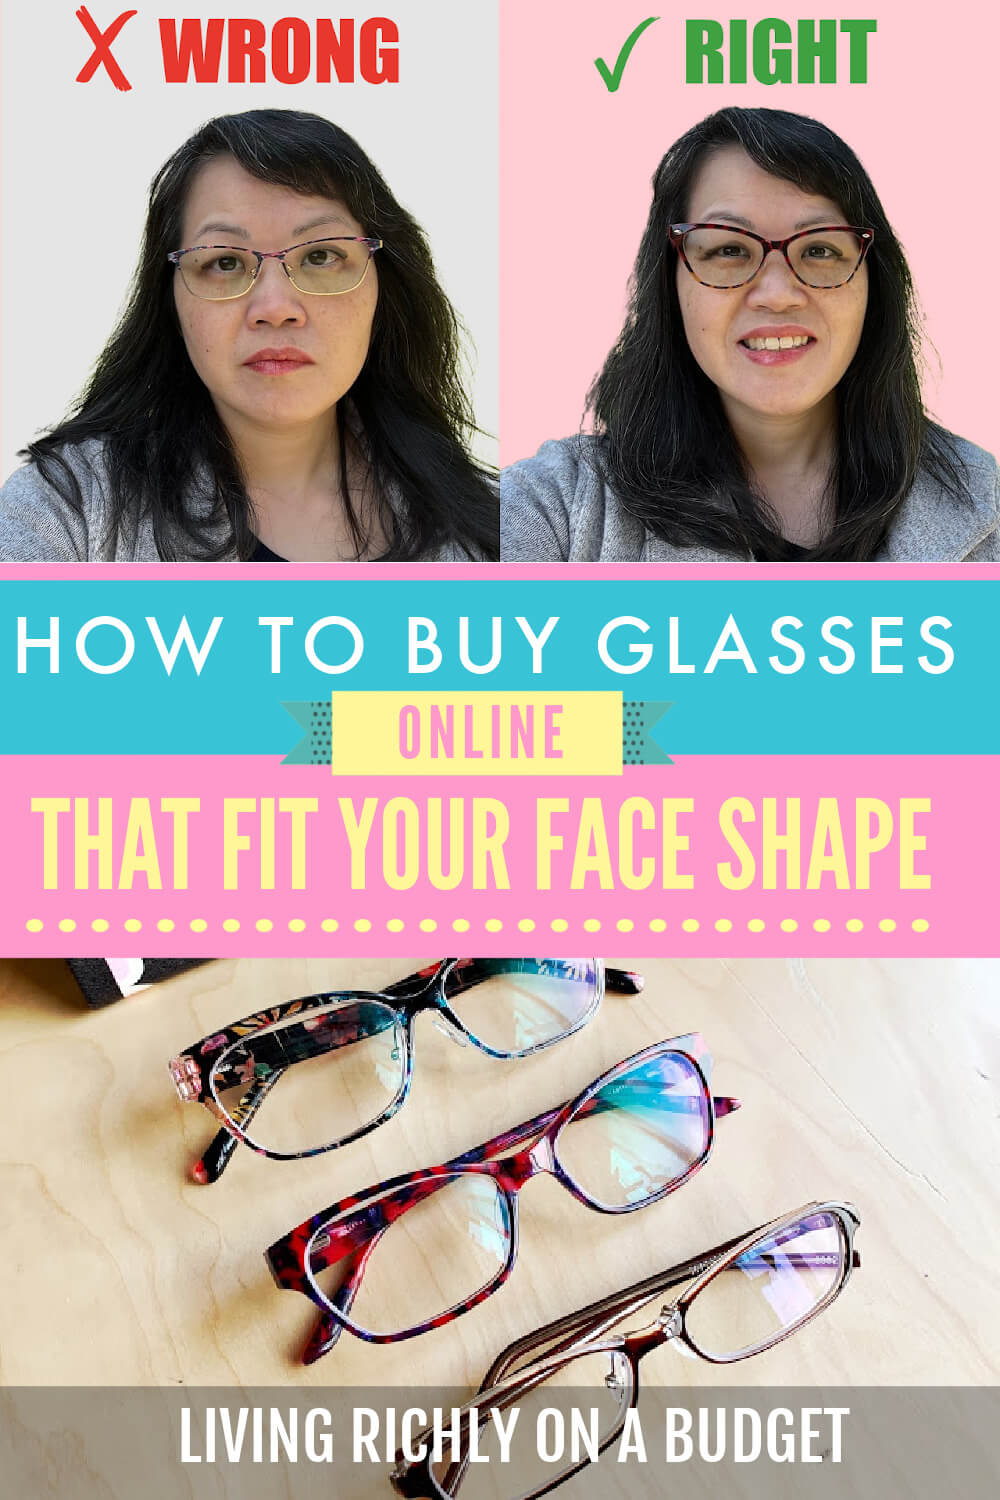 Find Glasses for Your Face Shape + How to Buy Online (Video)